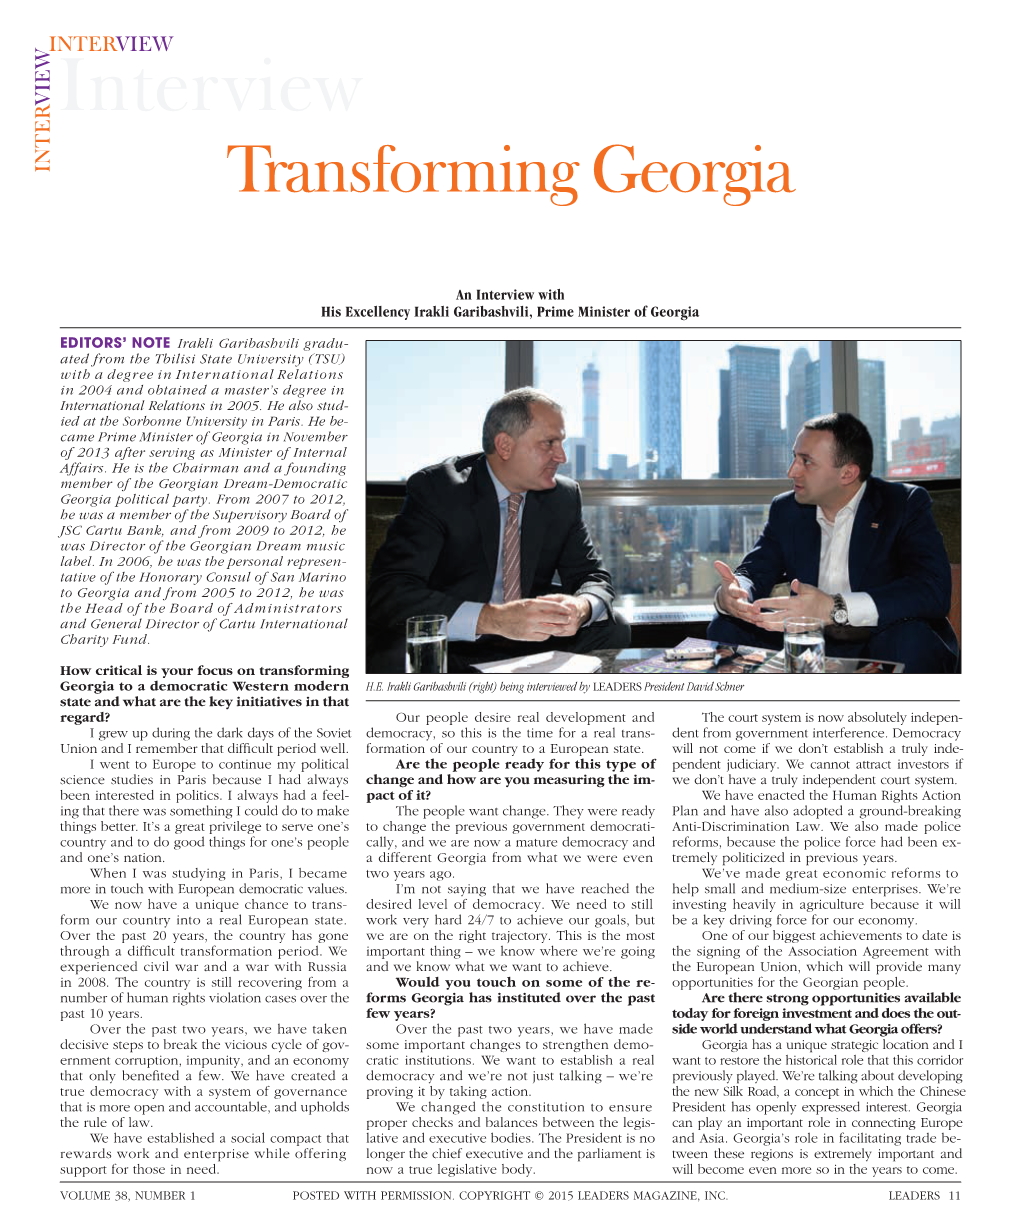 To Download a PDF of an Interview with His Excellency Irakli Garibashvili, Prime Minister